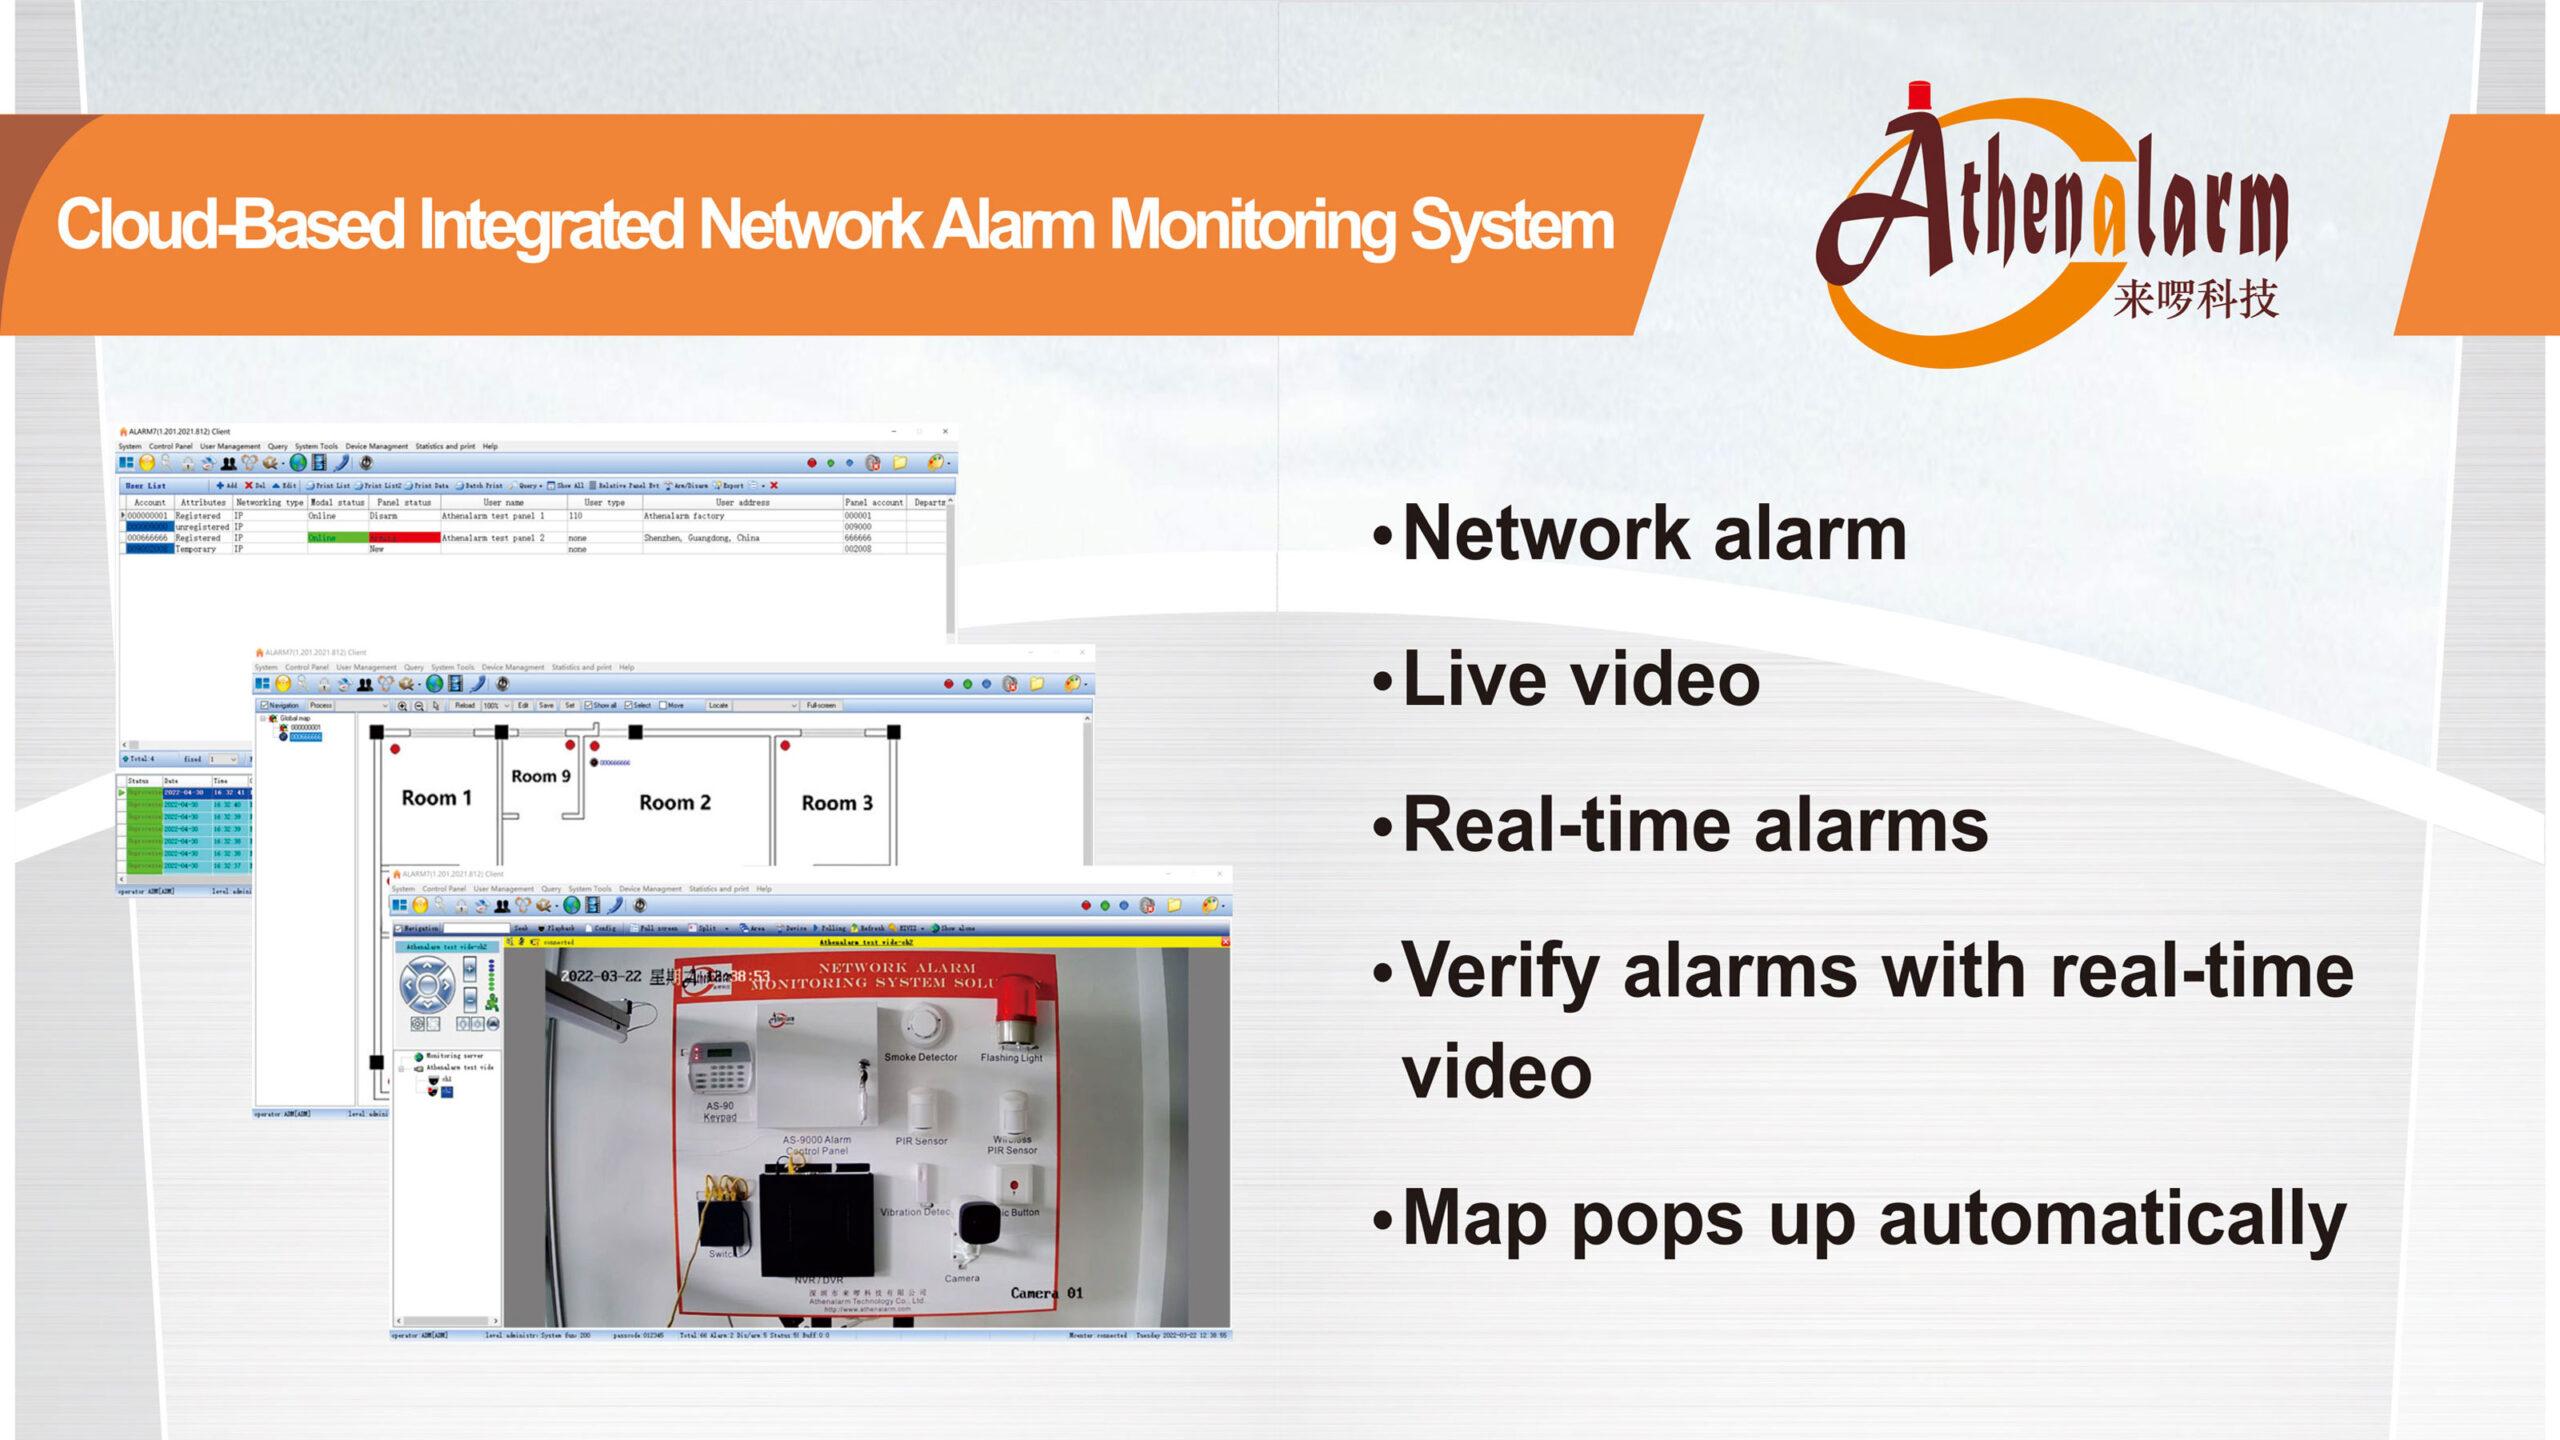 Cloud based integrated network alarm monitoring system